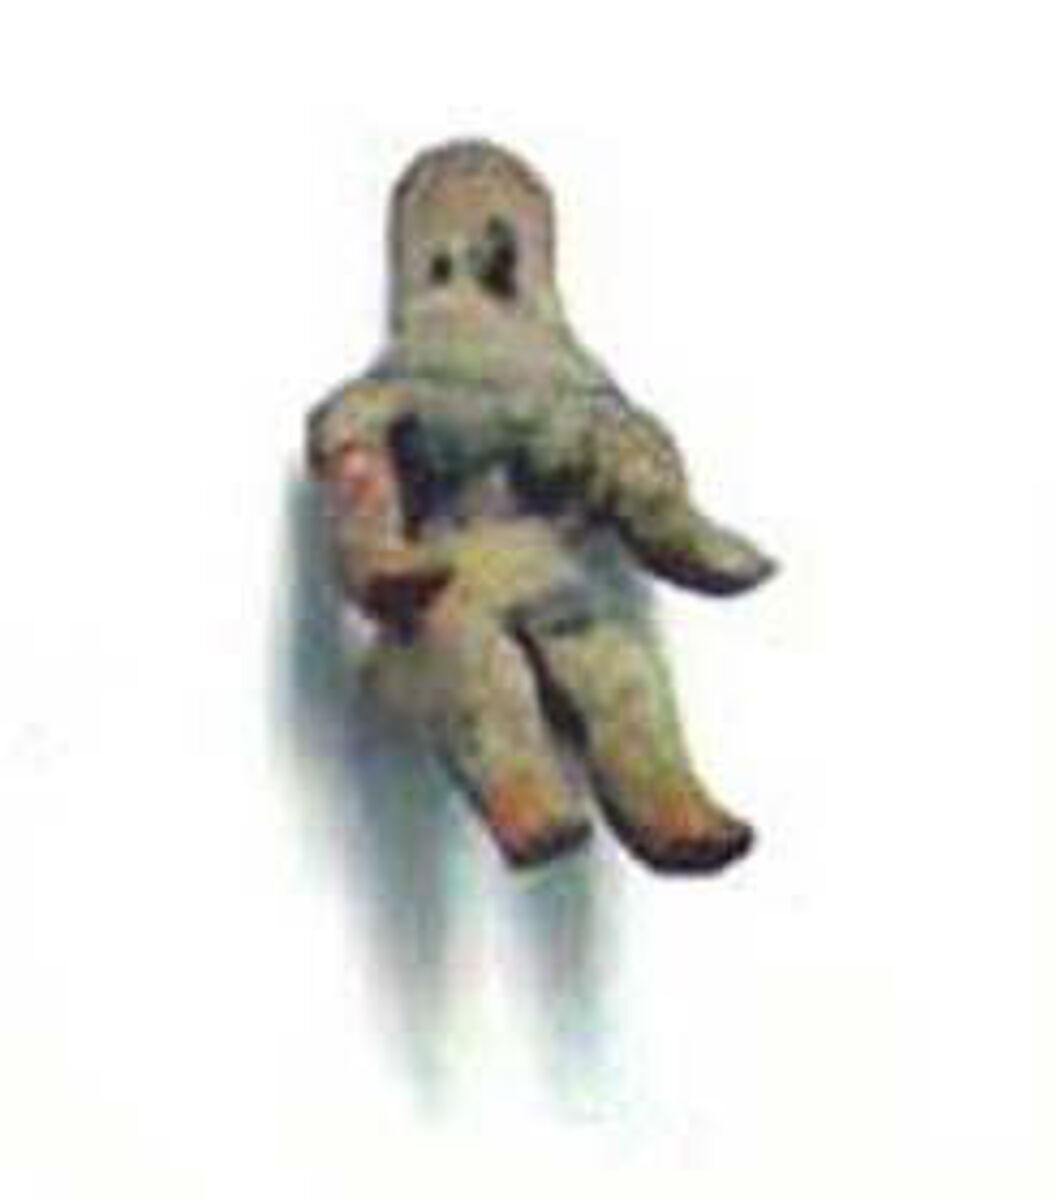 Hunched Female Figure with Necklace, Terracotta, Baluchistan 